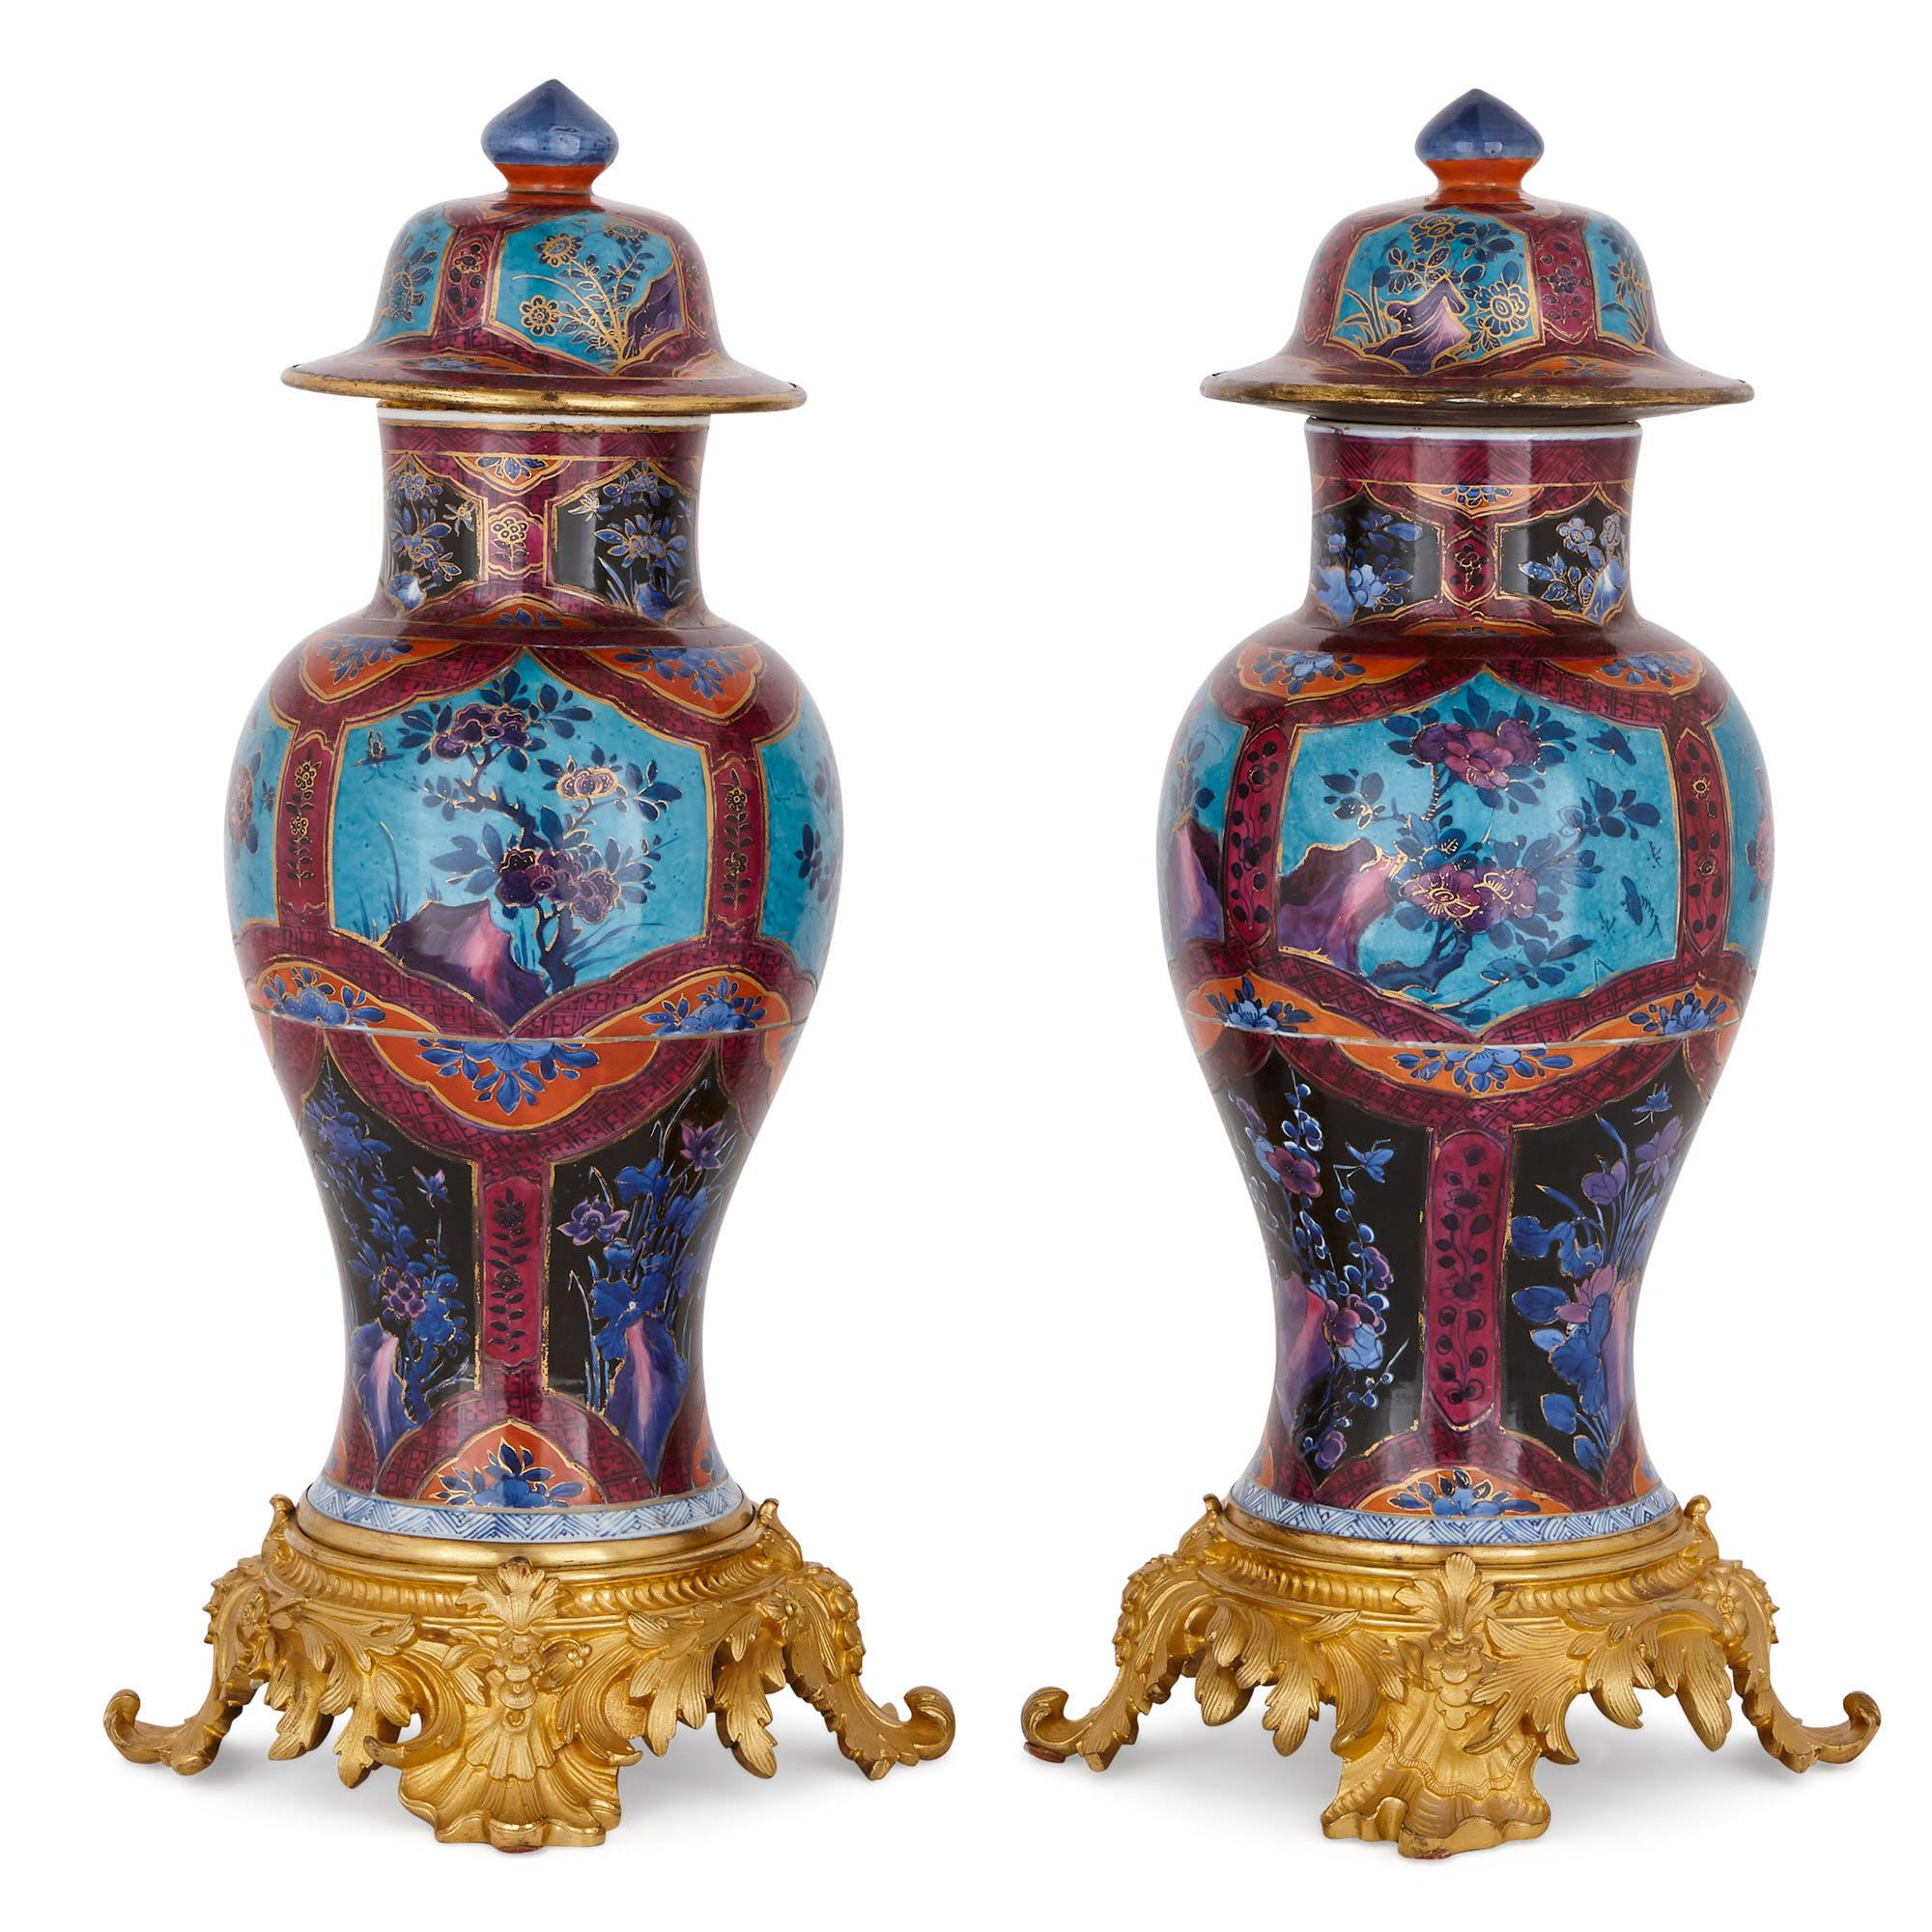 These porcelain vases are exquisite pieces of antique Chinese decorative art. They were crafted in the late Qing dynasty, which lasted from 1644-1911. This period in China is widely celebrated for producing beautiful, hand painted porcelain wares.